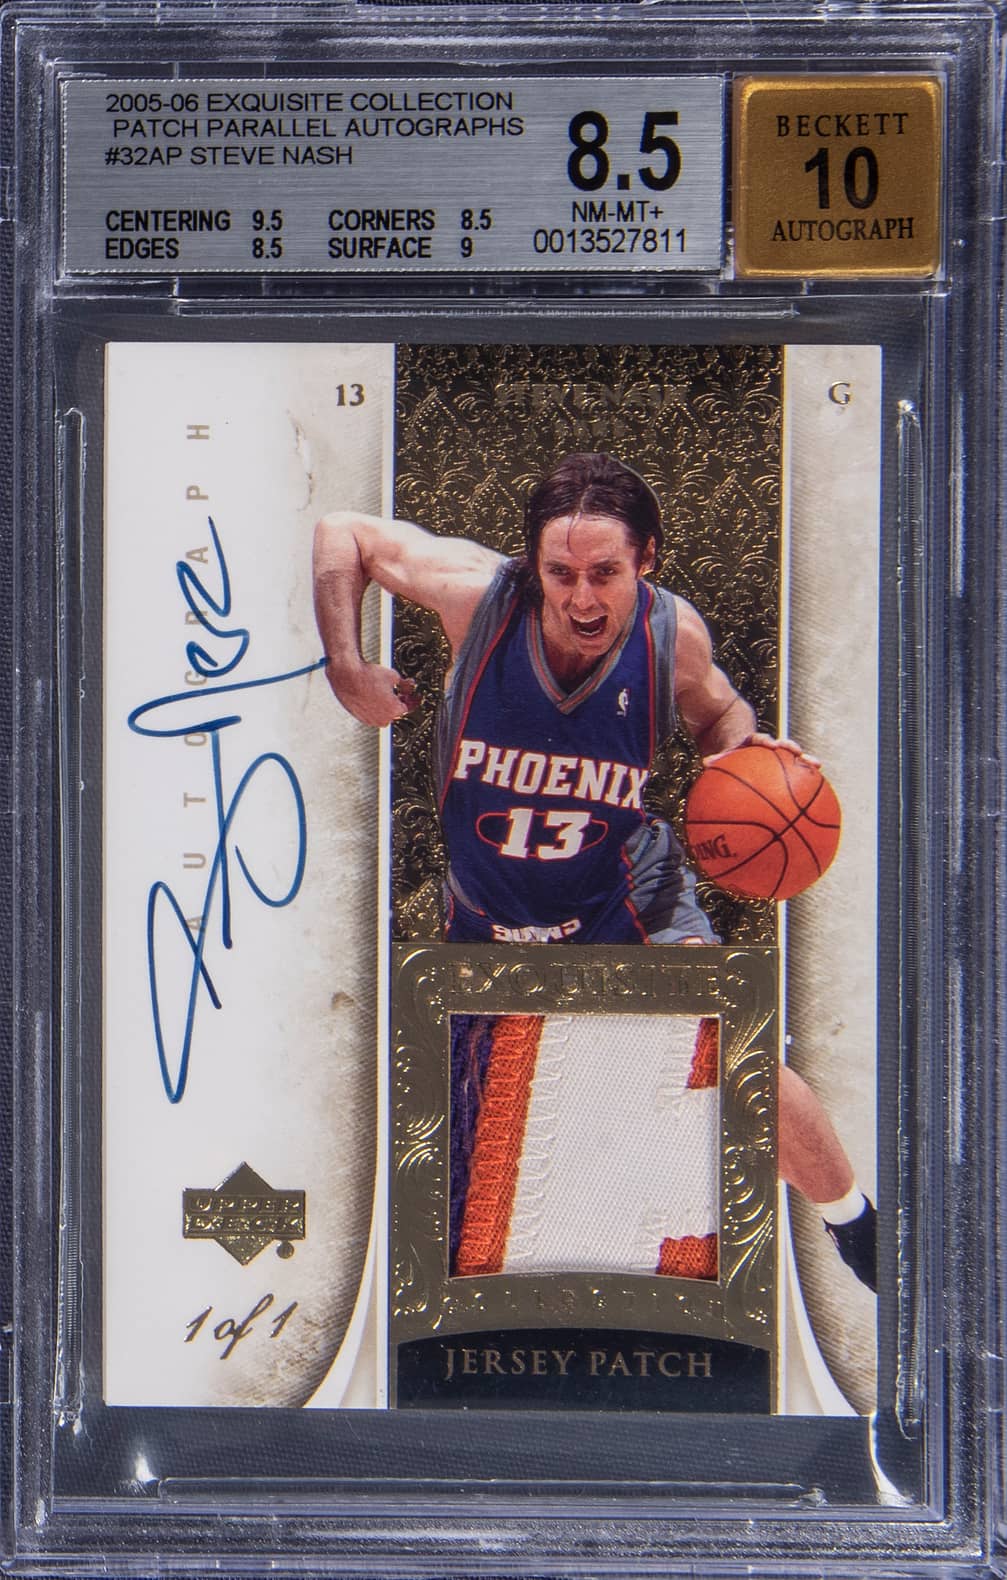 2005-06 UD Exquisite Collection Patch Parallel Autograph #32-AP Steve Nash Signed Game-Used Patch Card (#1/1) – BGS NM-MT+ 8.5/Beckett 10